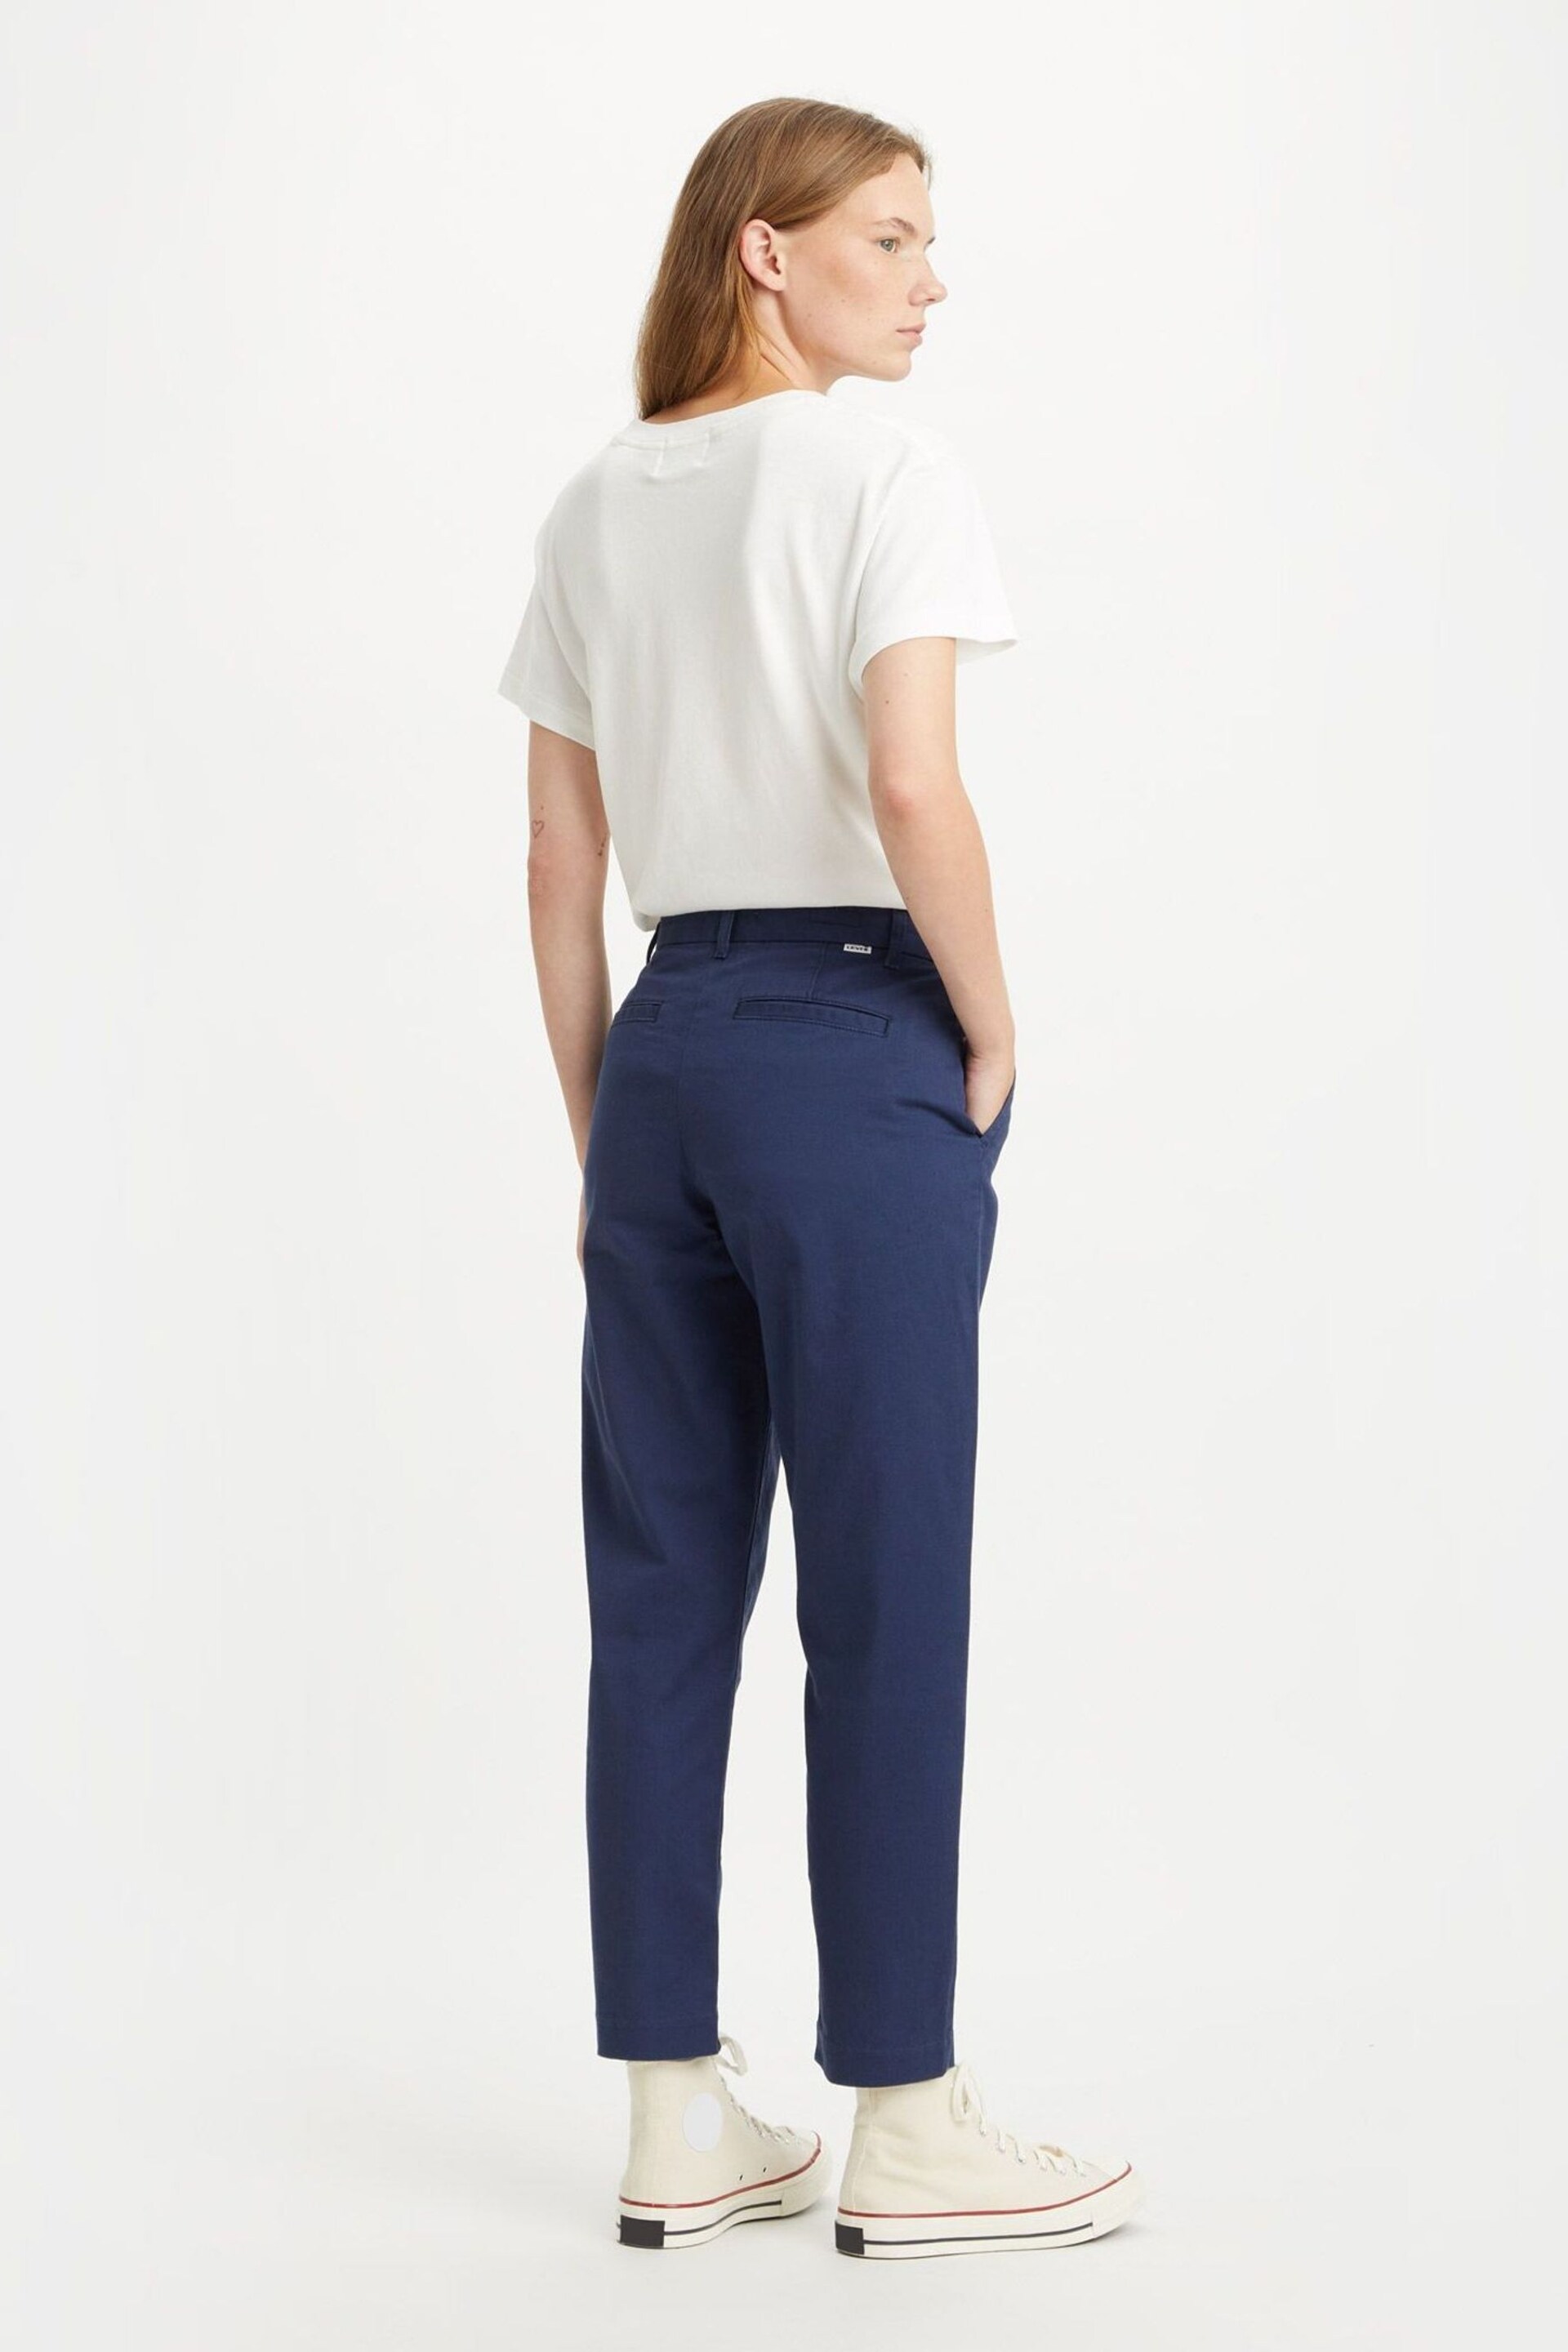 Levi's® Blue Essential Chino Trousers - Image 2 of 3